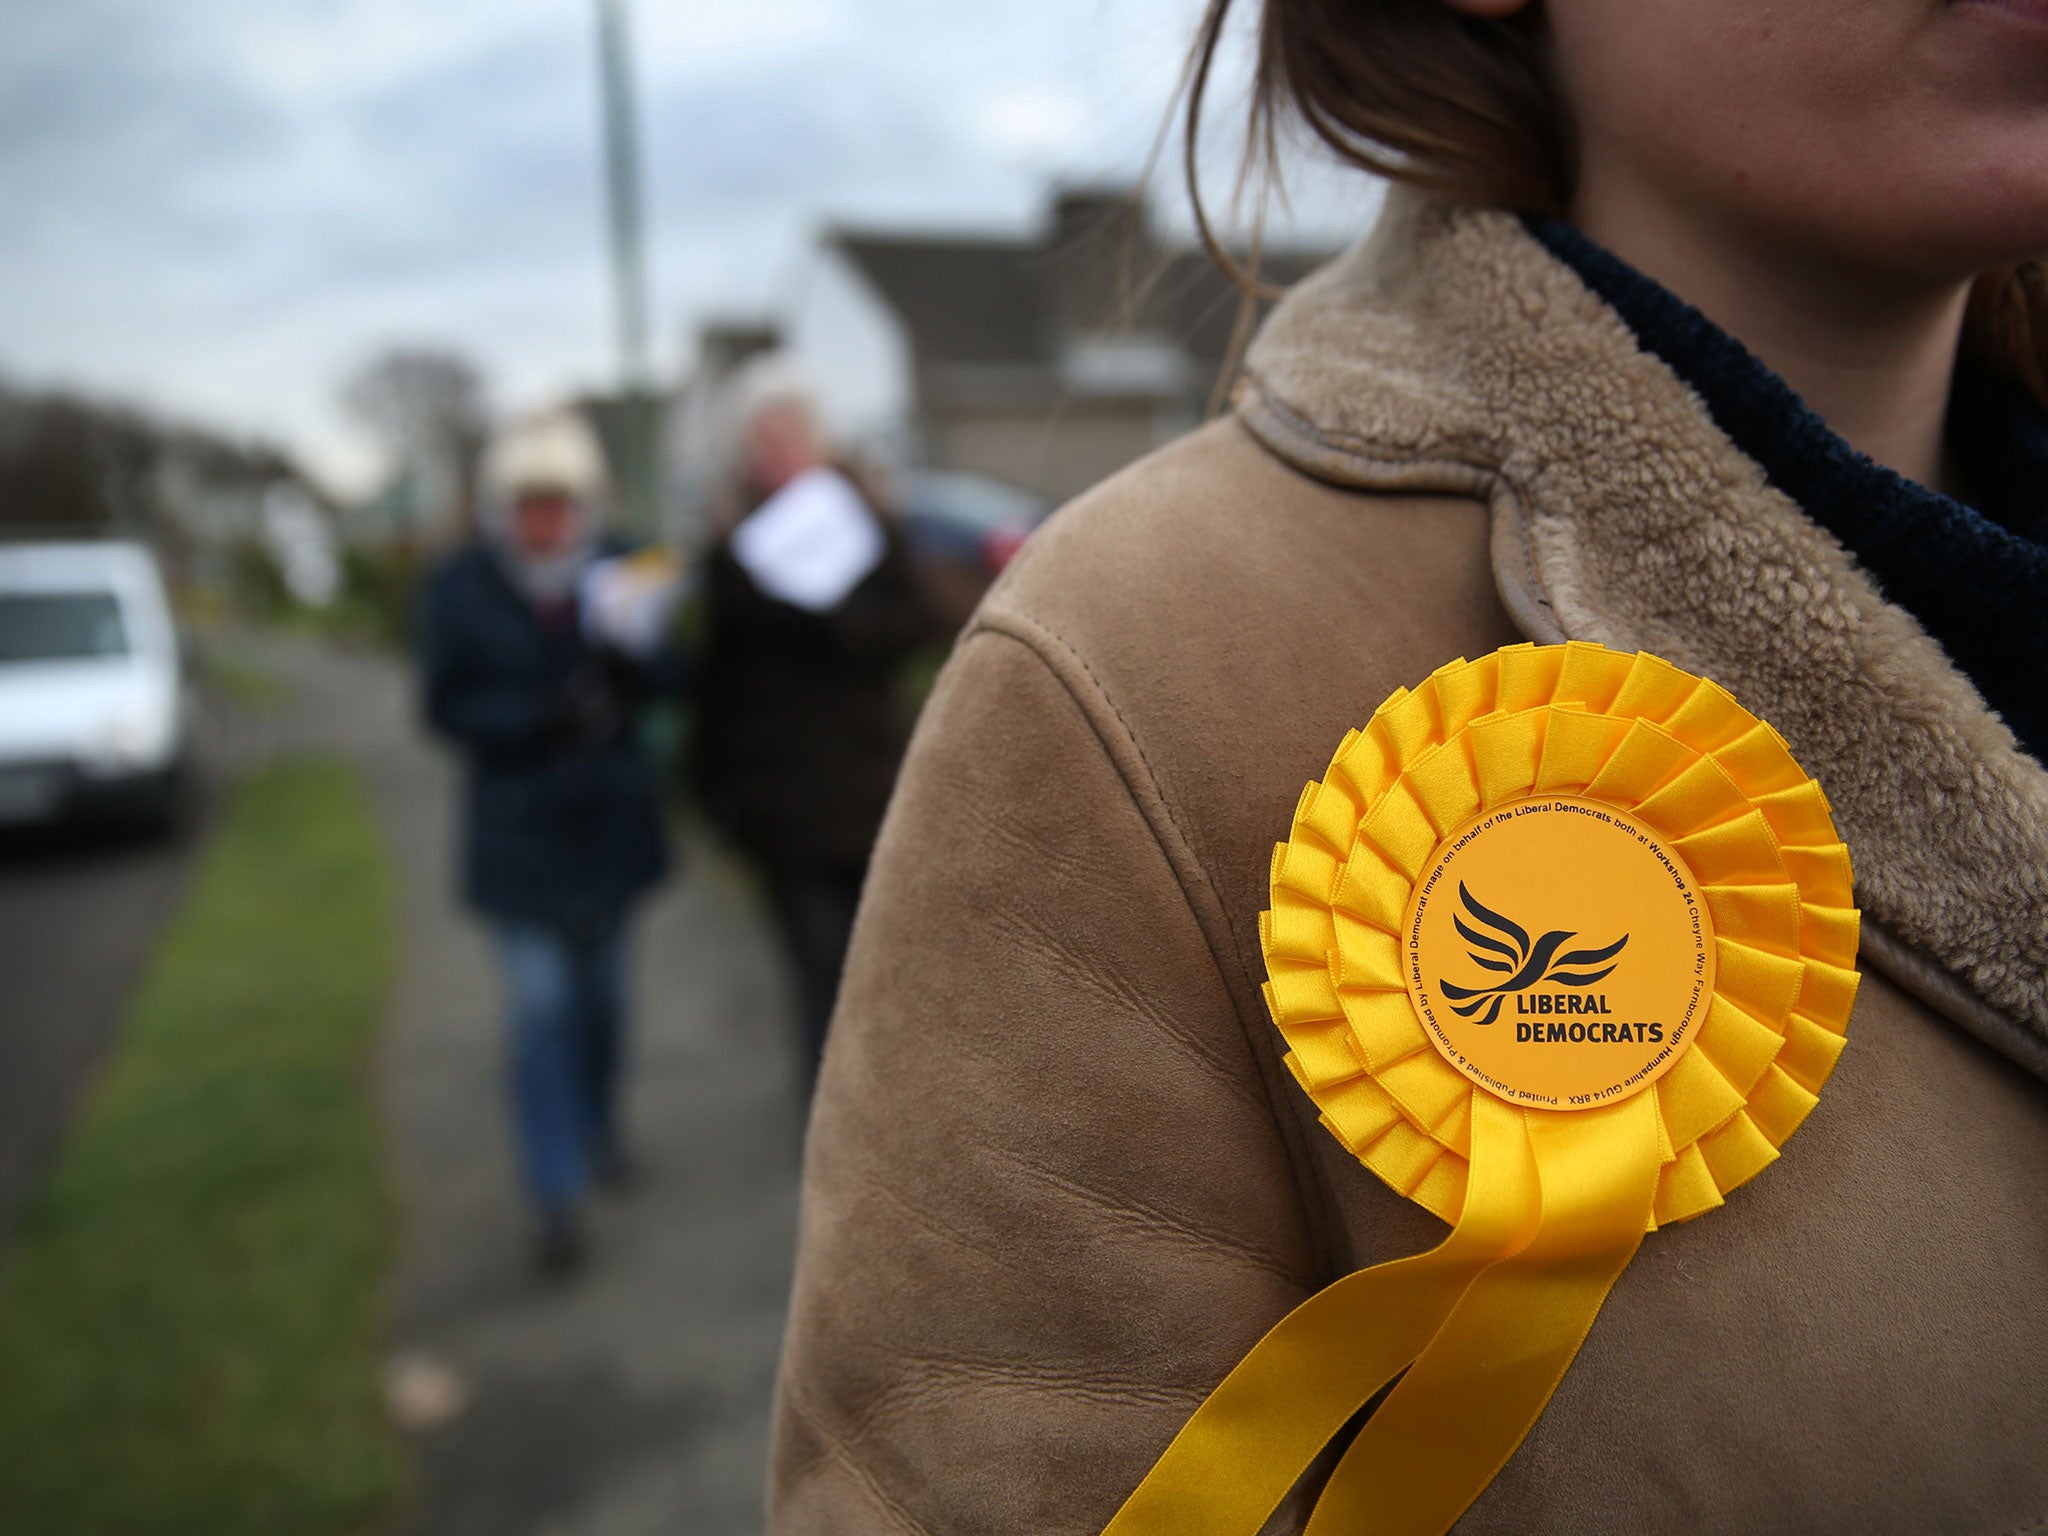 Since the Liberal Democrats were decimated at the general election, party membership numbers have increased getty